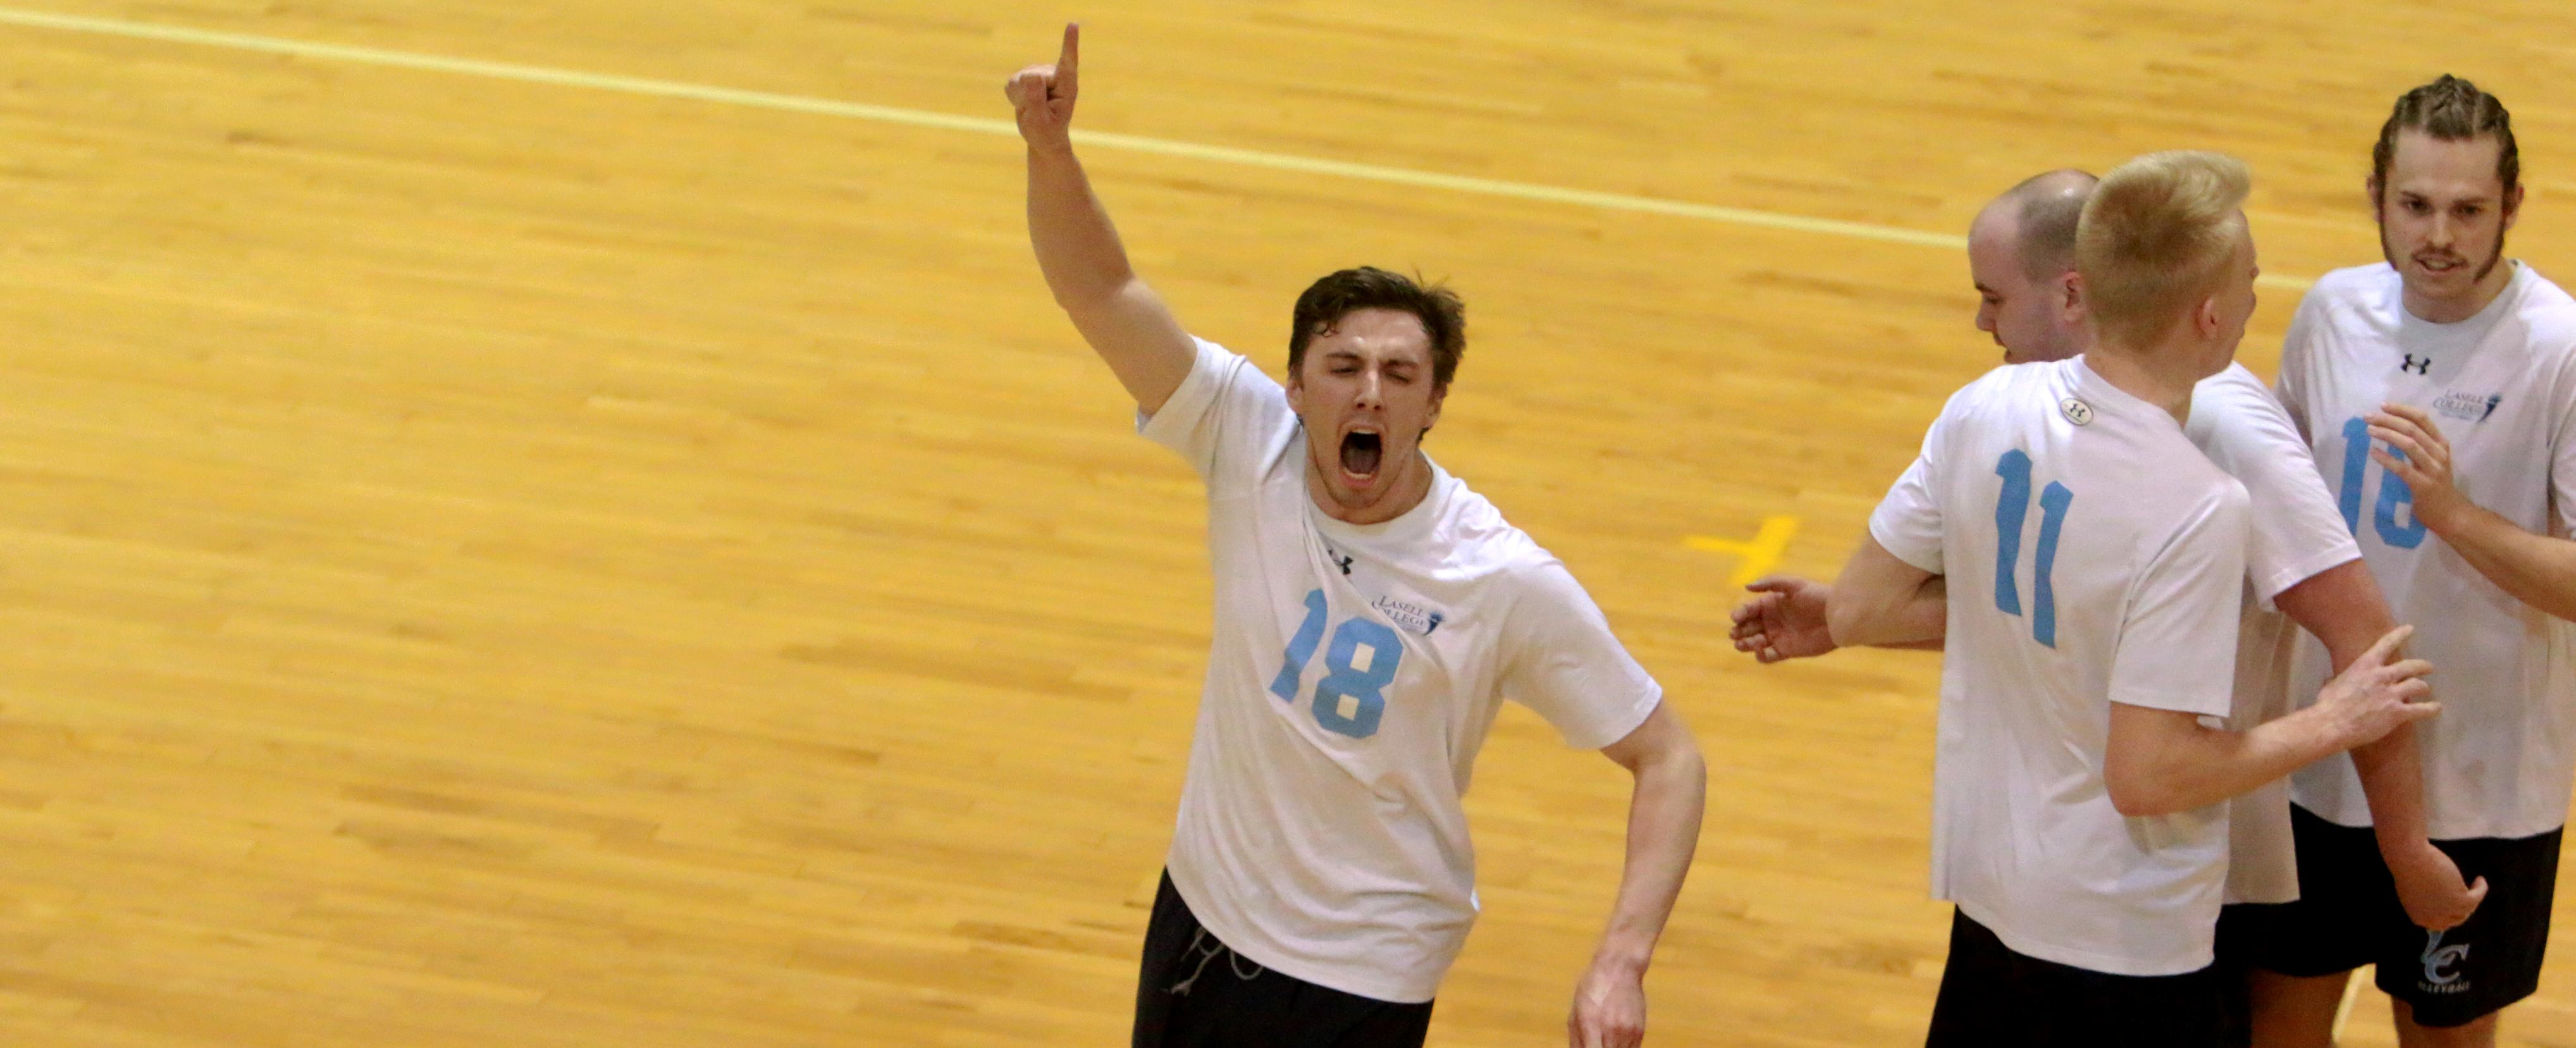 Men's Volleyball Digs Deep to Take Rivier in Straight Sets 3-0